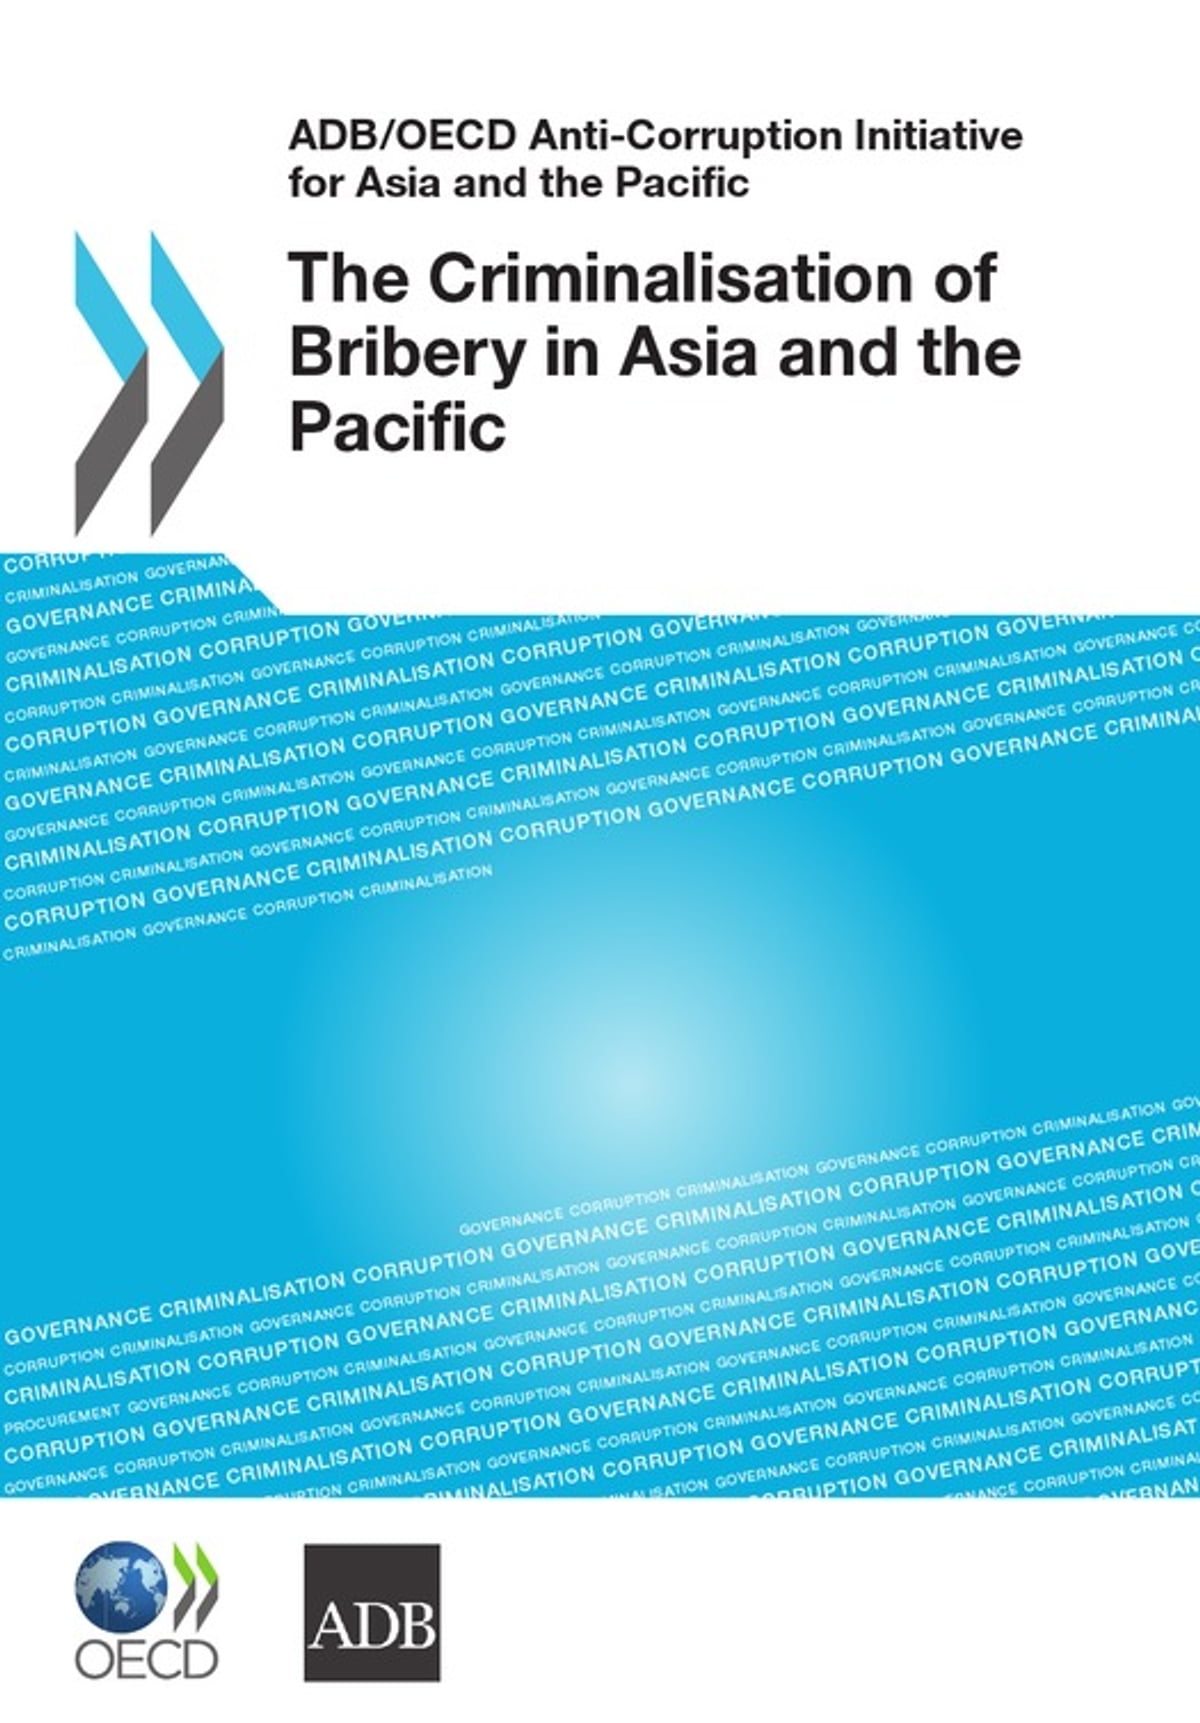 The criminalisation of bribery in Asia and the Pacific